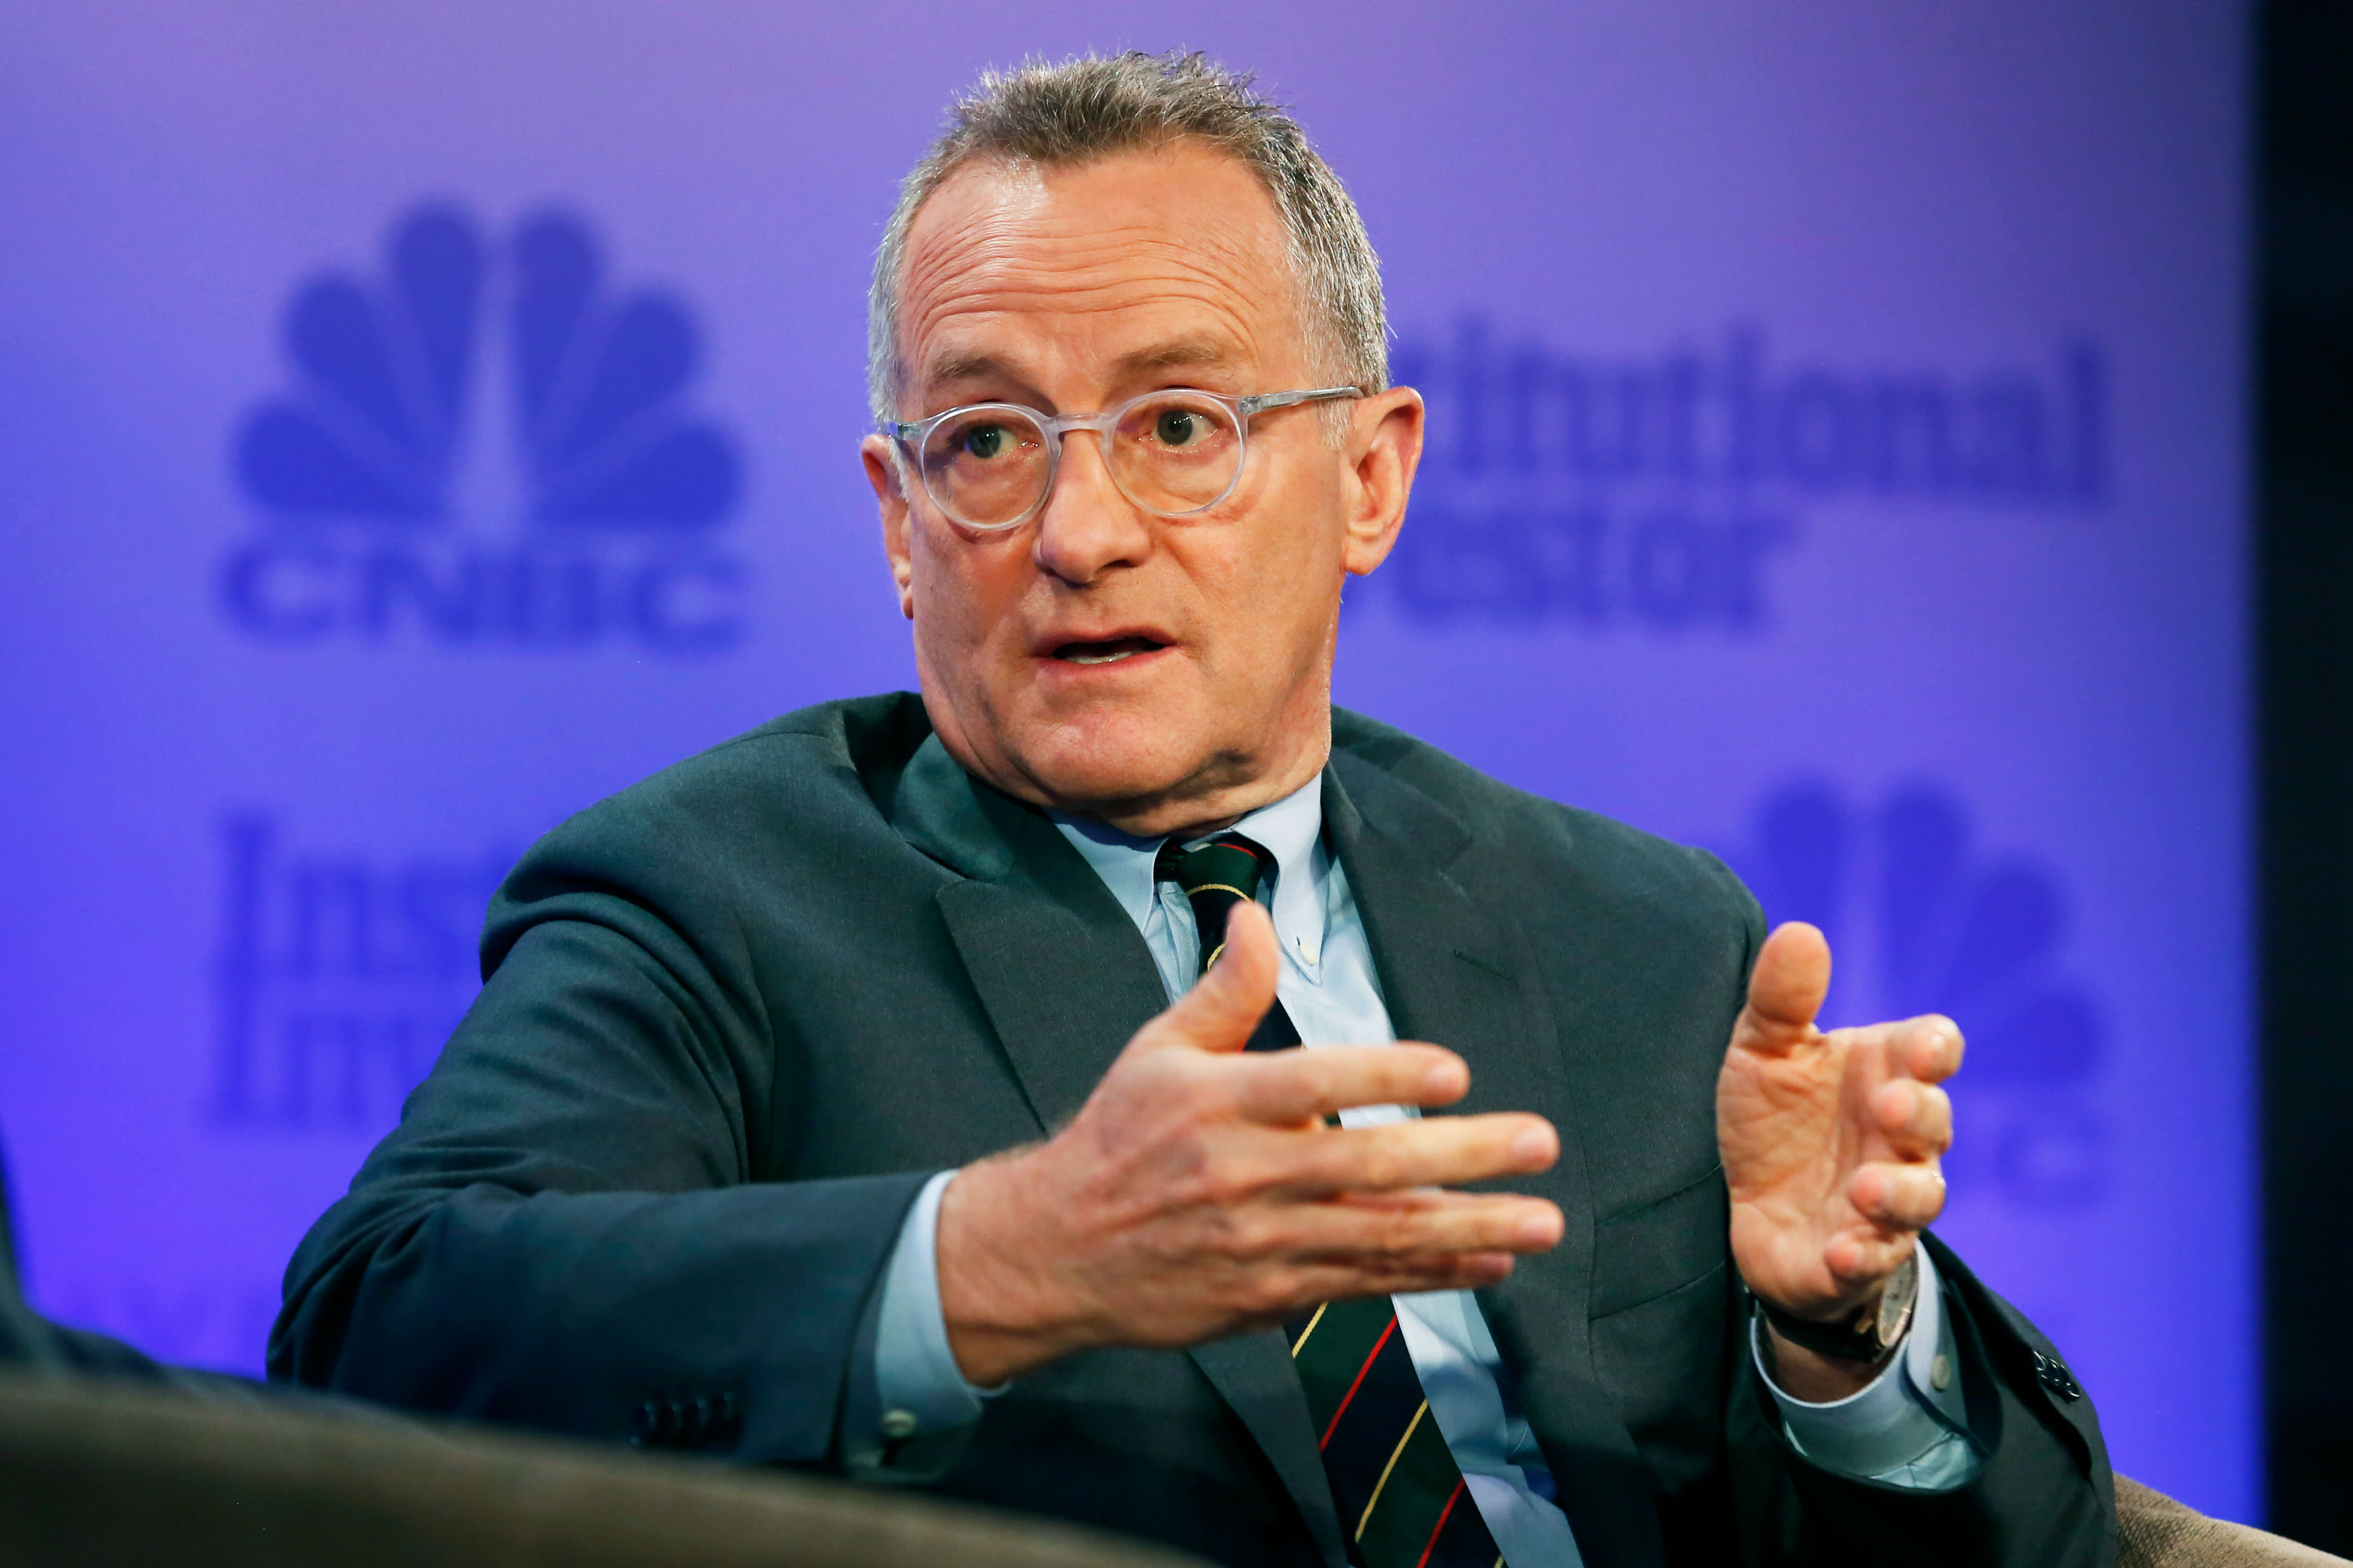 Here are investing tips from the memo of Howard Marks, which Warren Buffett reads